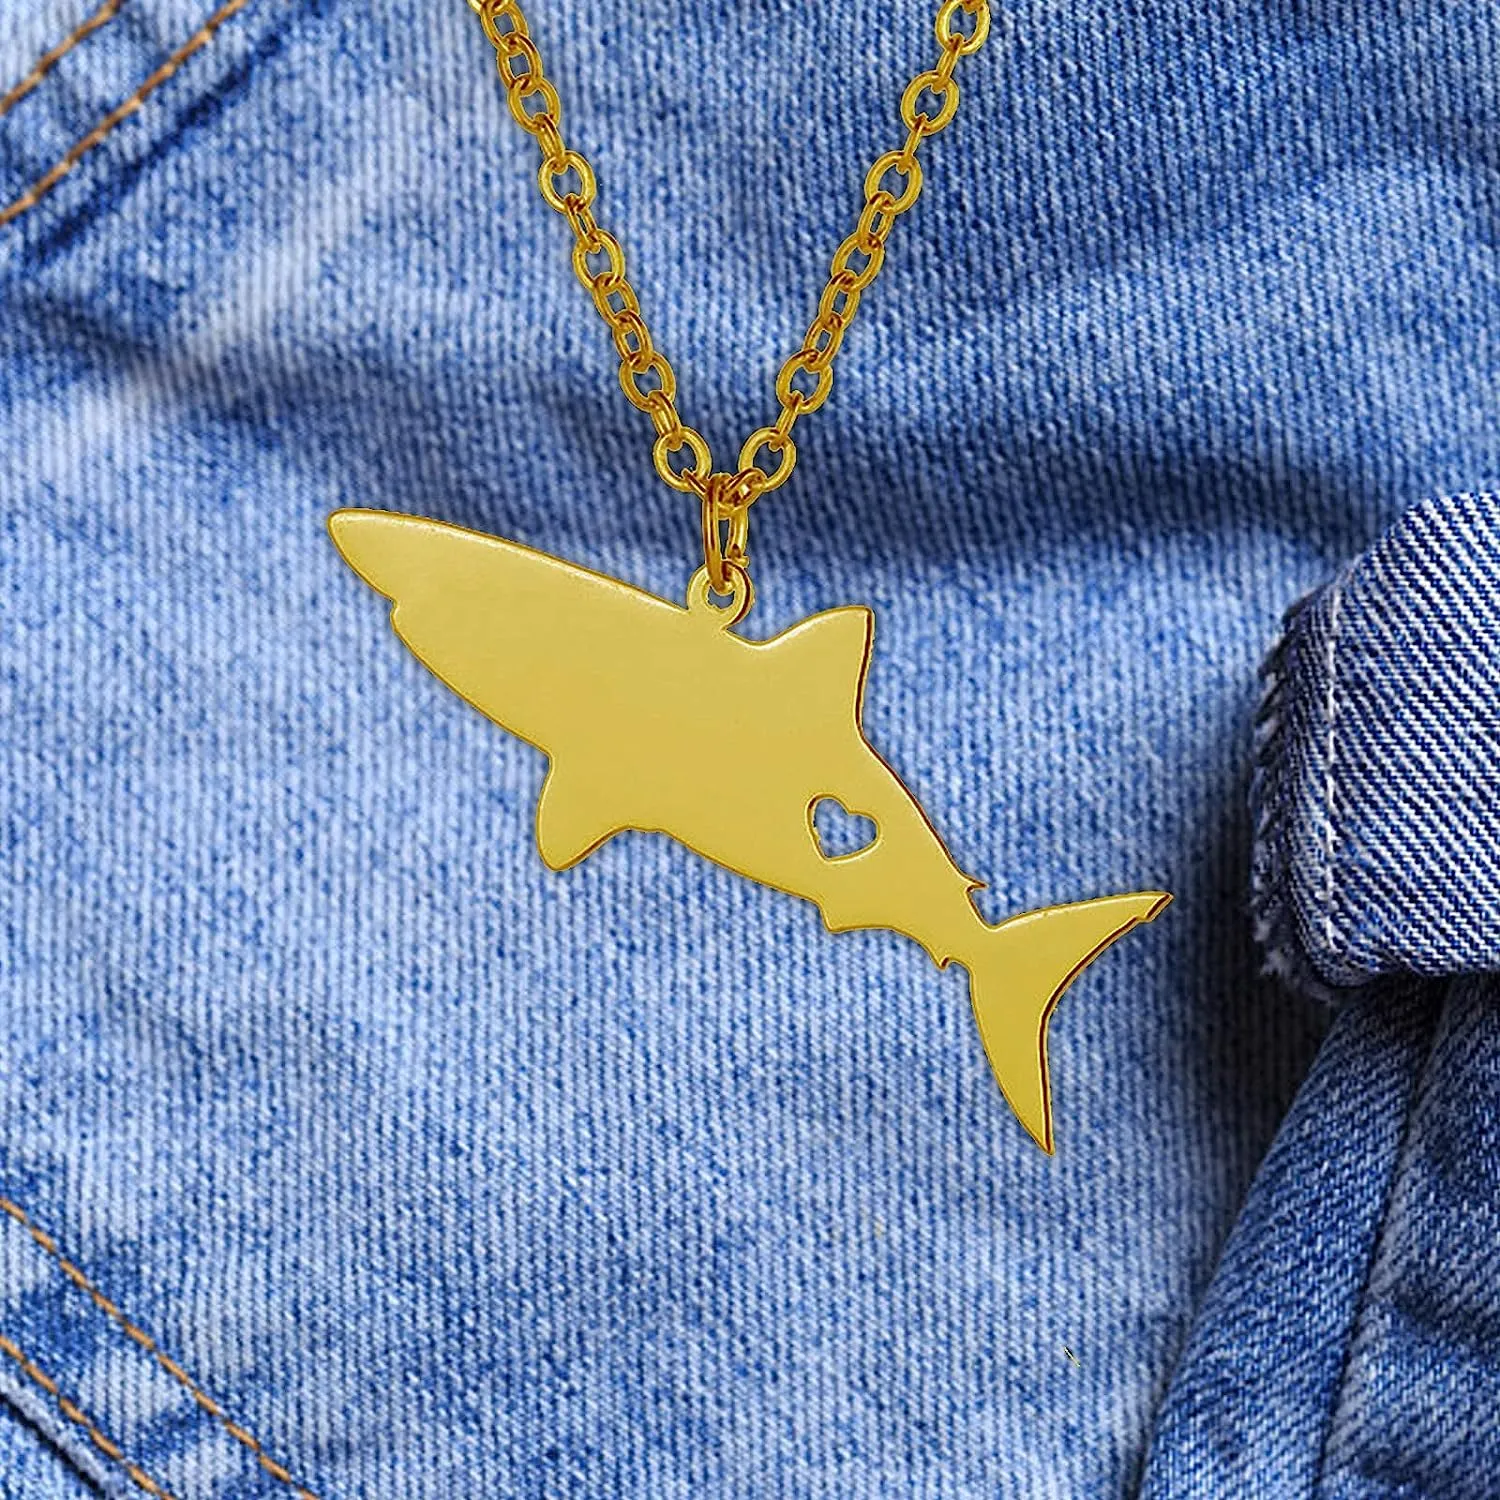 Cute Tiny Fish White Shark Whale Necklace with Heart Small Ray Cetacean Chain Stainless Steel Pendant Clavicle Collar Choker Sea Ocean Aquatic Marine Life Jewelry